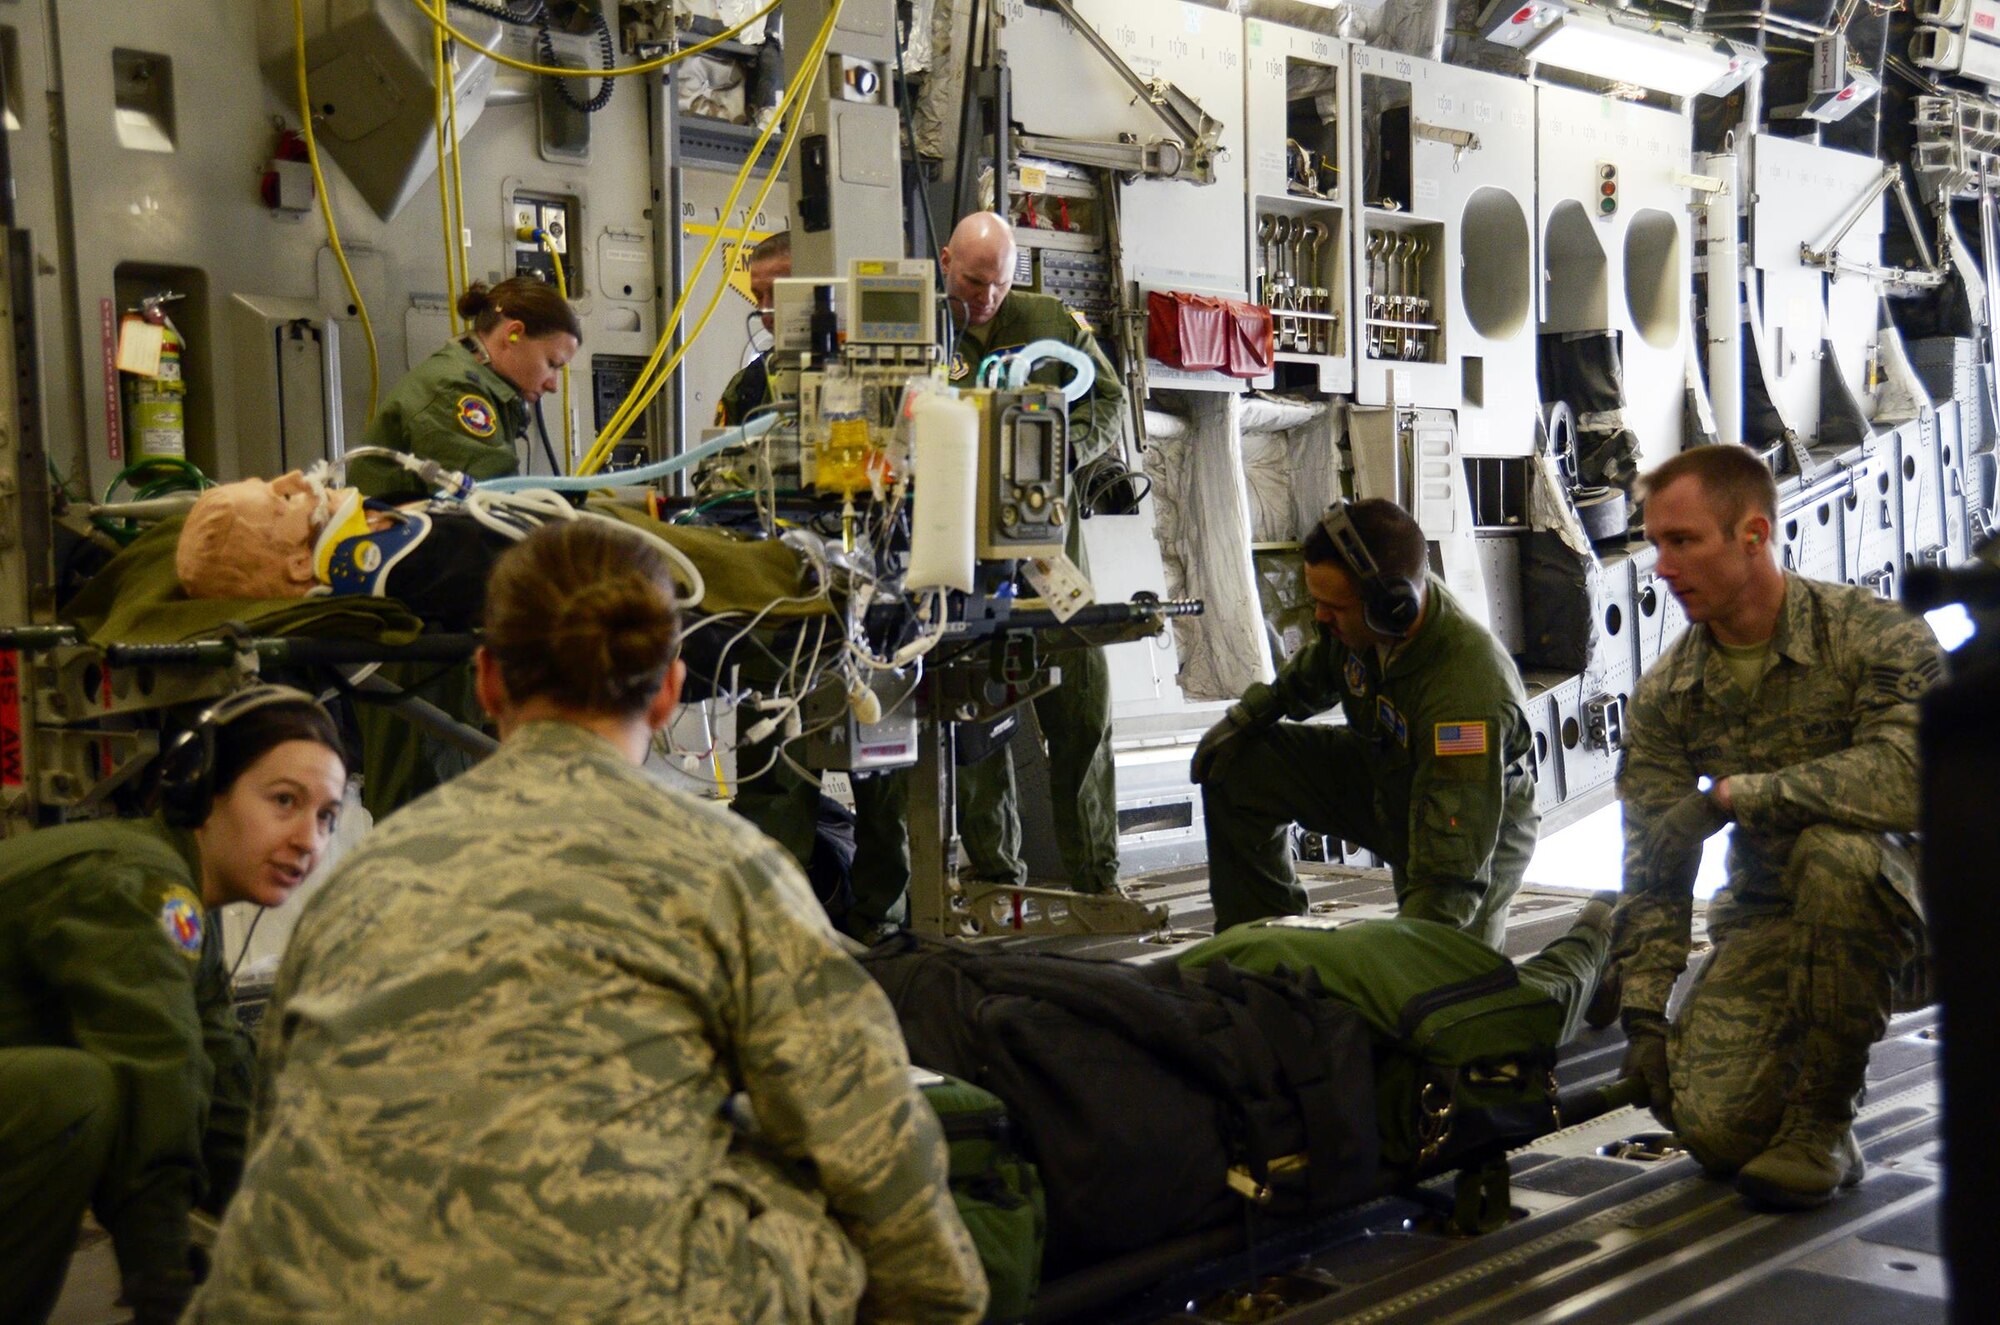 Airmen from the 445th Aeromedical Staging Squadron and 445th Aeromedical Evacuation Squadron lift a "patient" onto a litter stanchion while on board a 445th Airlift Wing C-17 Globemaster III, April 1, 2017. The two units worked together during a training exercise to provide care to notional patients. (U.S. Air Force photo/Staff Sgt. Joel McCullough)